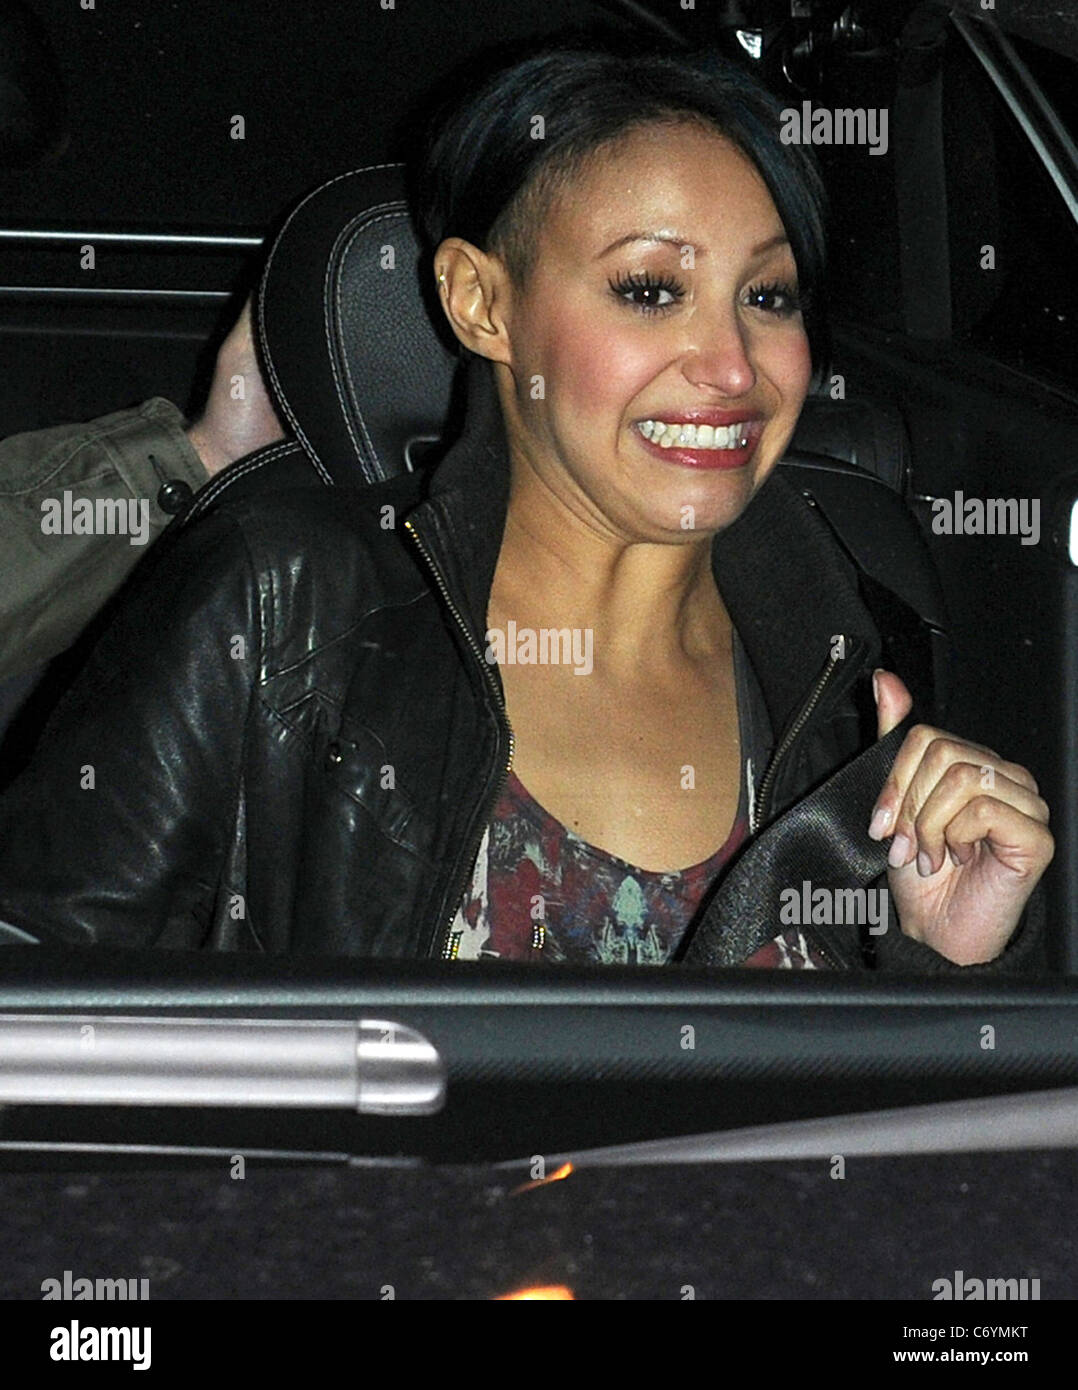 Sugarbabes singer Amelle Berrabah in a Mercedes sports car with her male companion in Soho London, England - 31.03.10 Stock Photo